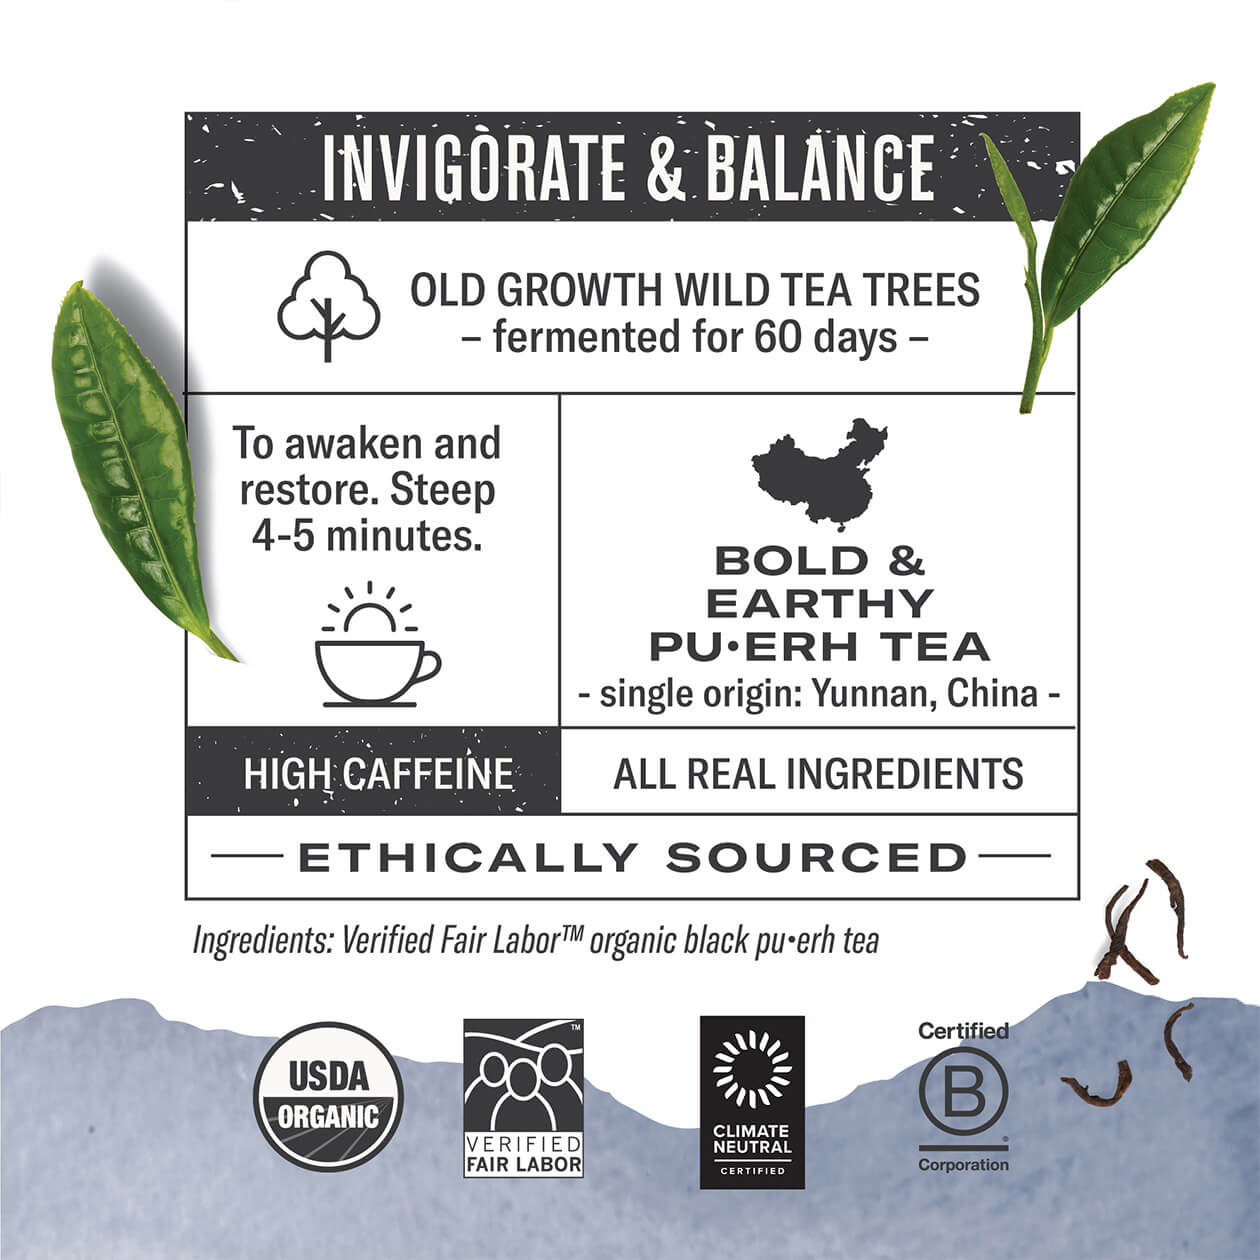 Infographic about Emperor's Puerh: steep 4-5 minutes, origin: Yunnan China, high caffeine, all real ingredients, ethically sourced